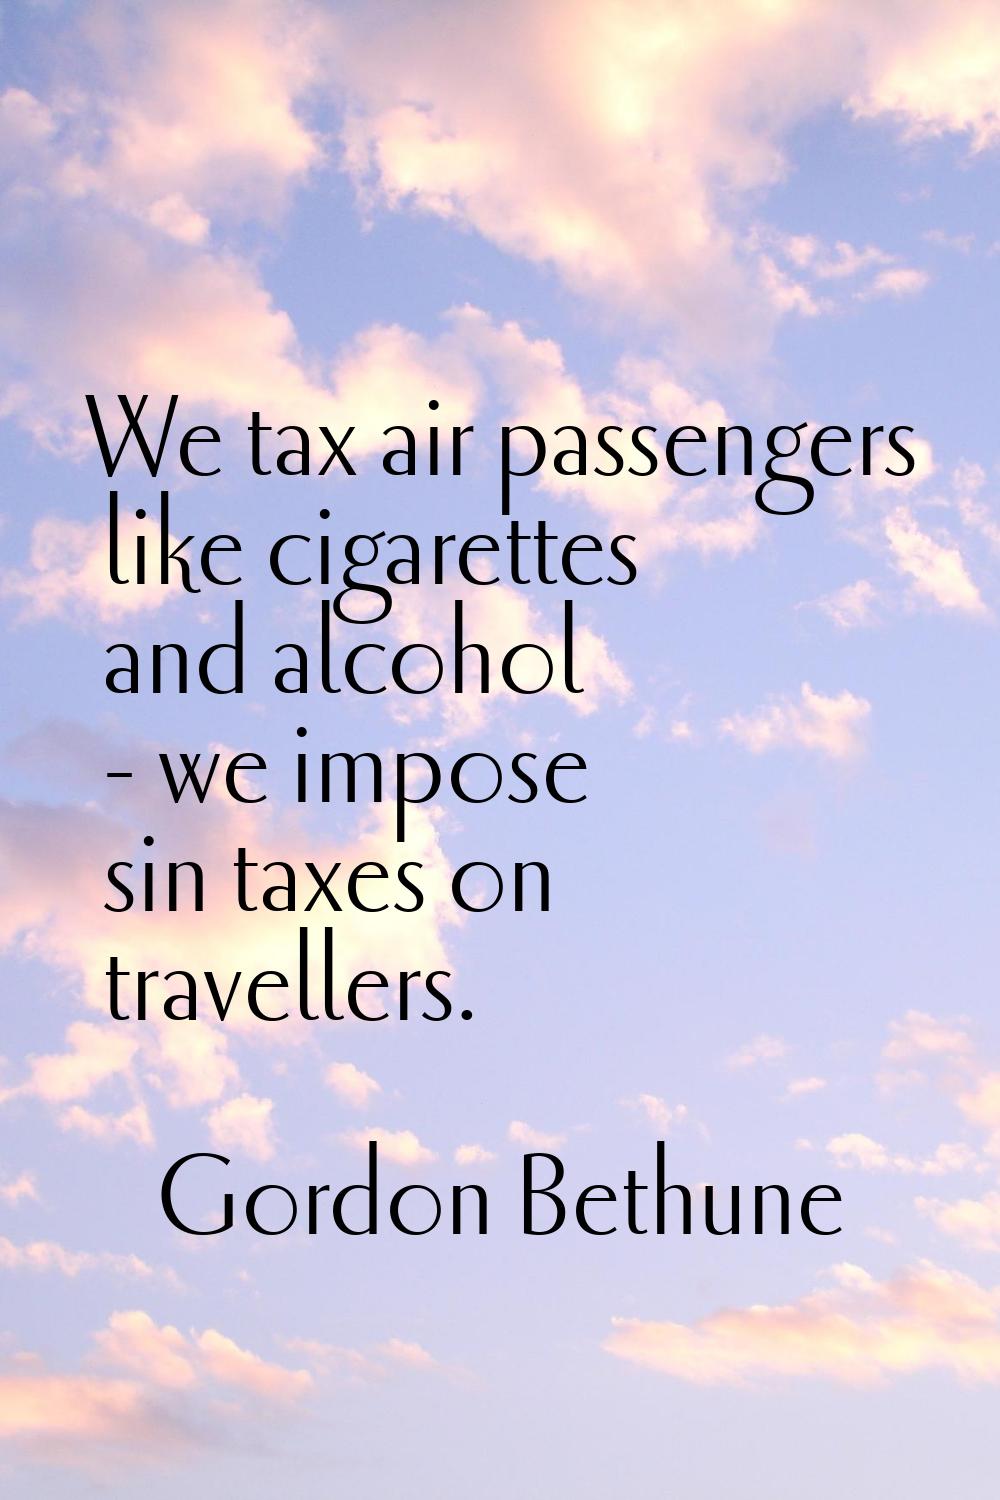 We tax air passengers like cigarettes and alcohol - we impose sin taxes on travellers.